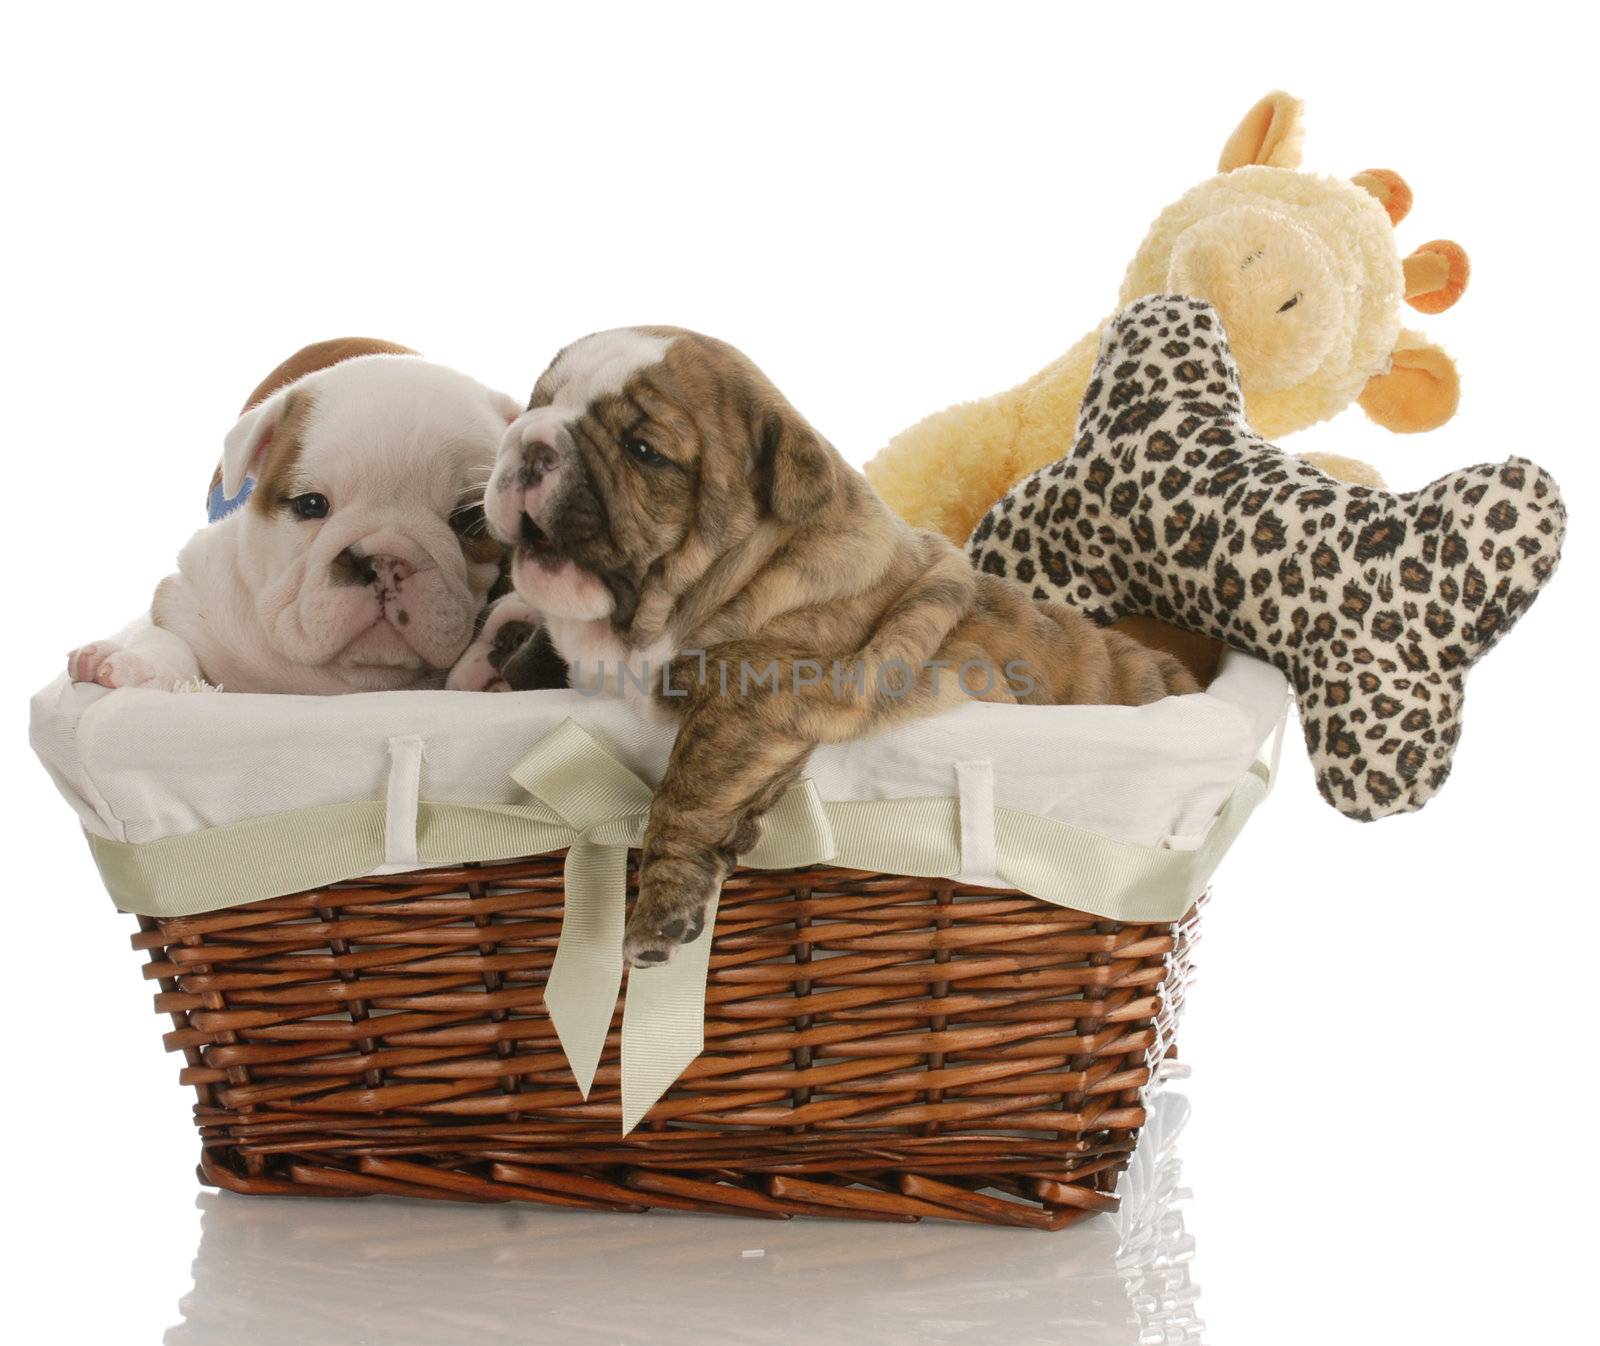 four week old english bulldog puppies in a wicker basket with stuffed toys 

